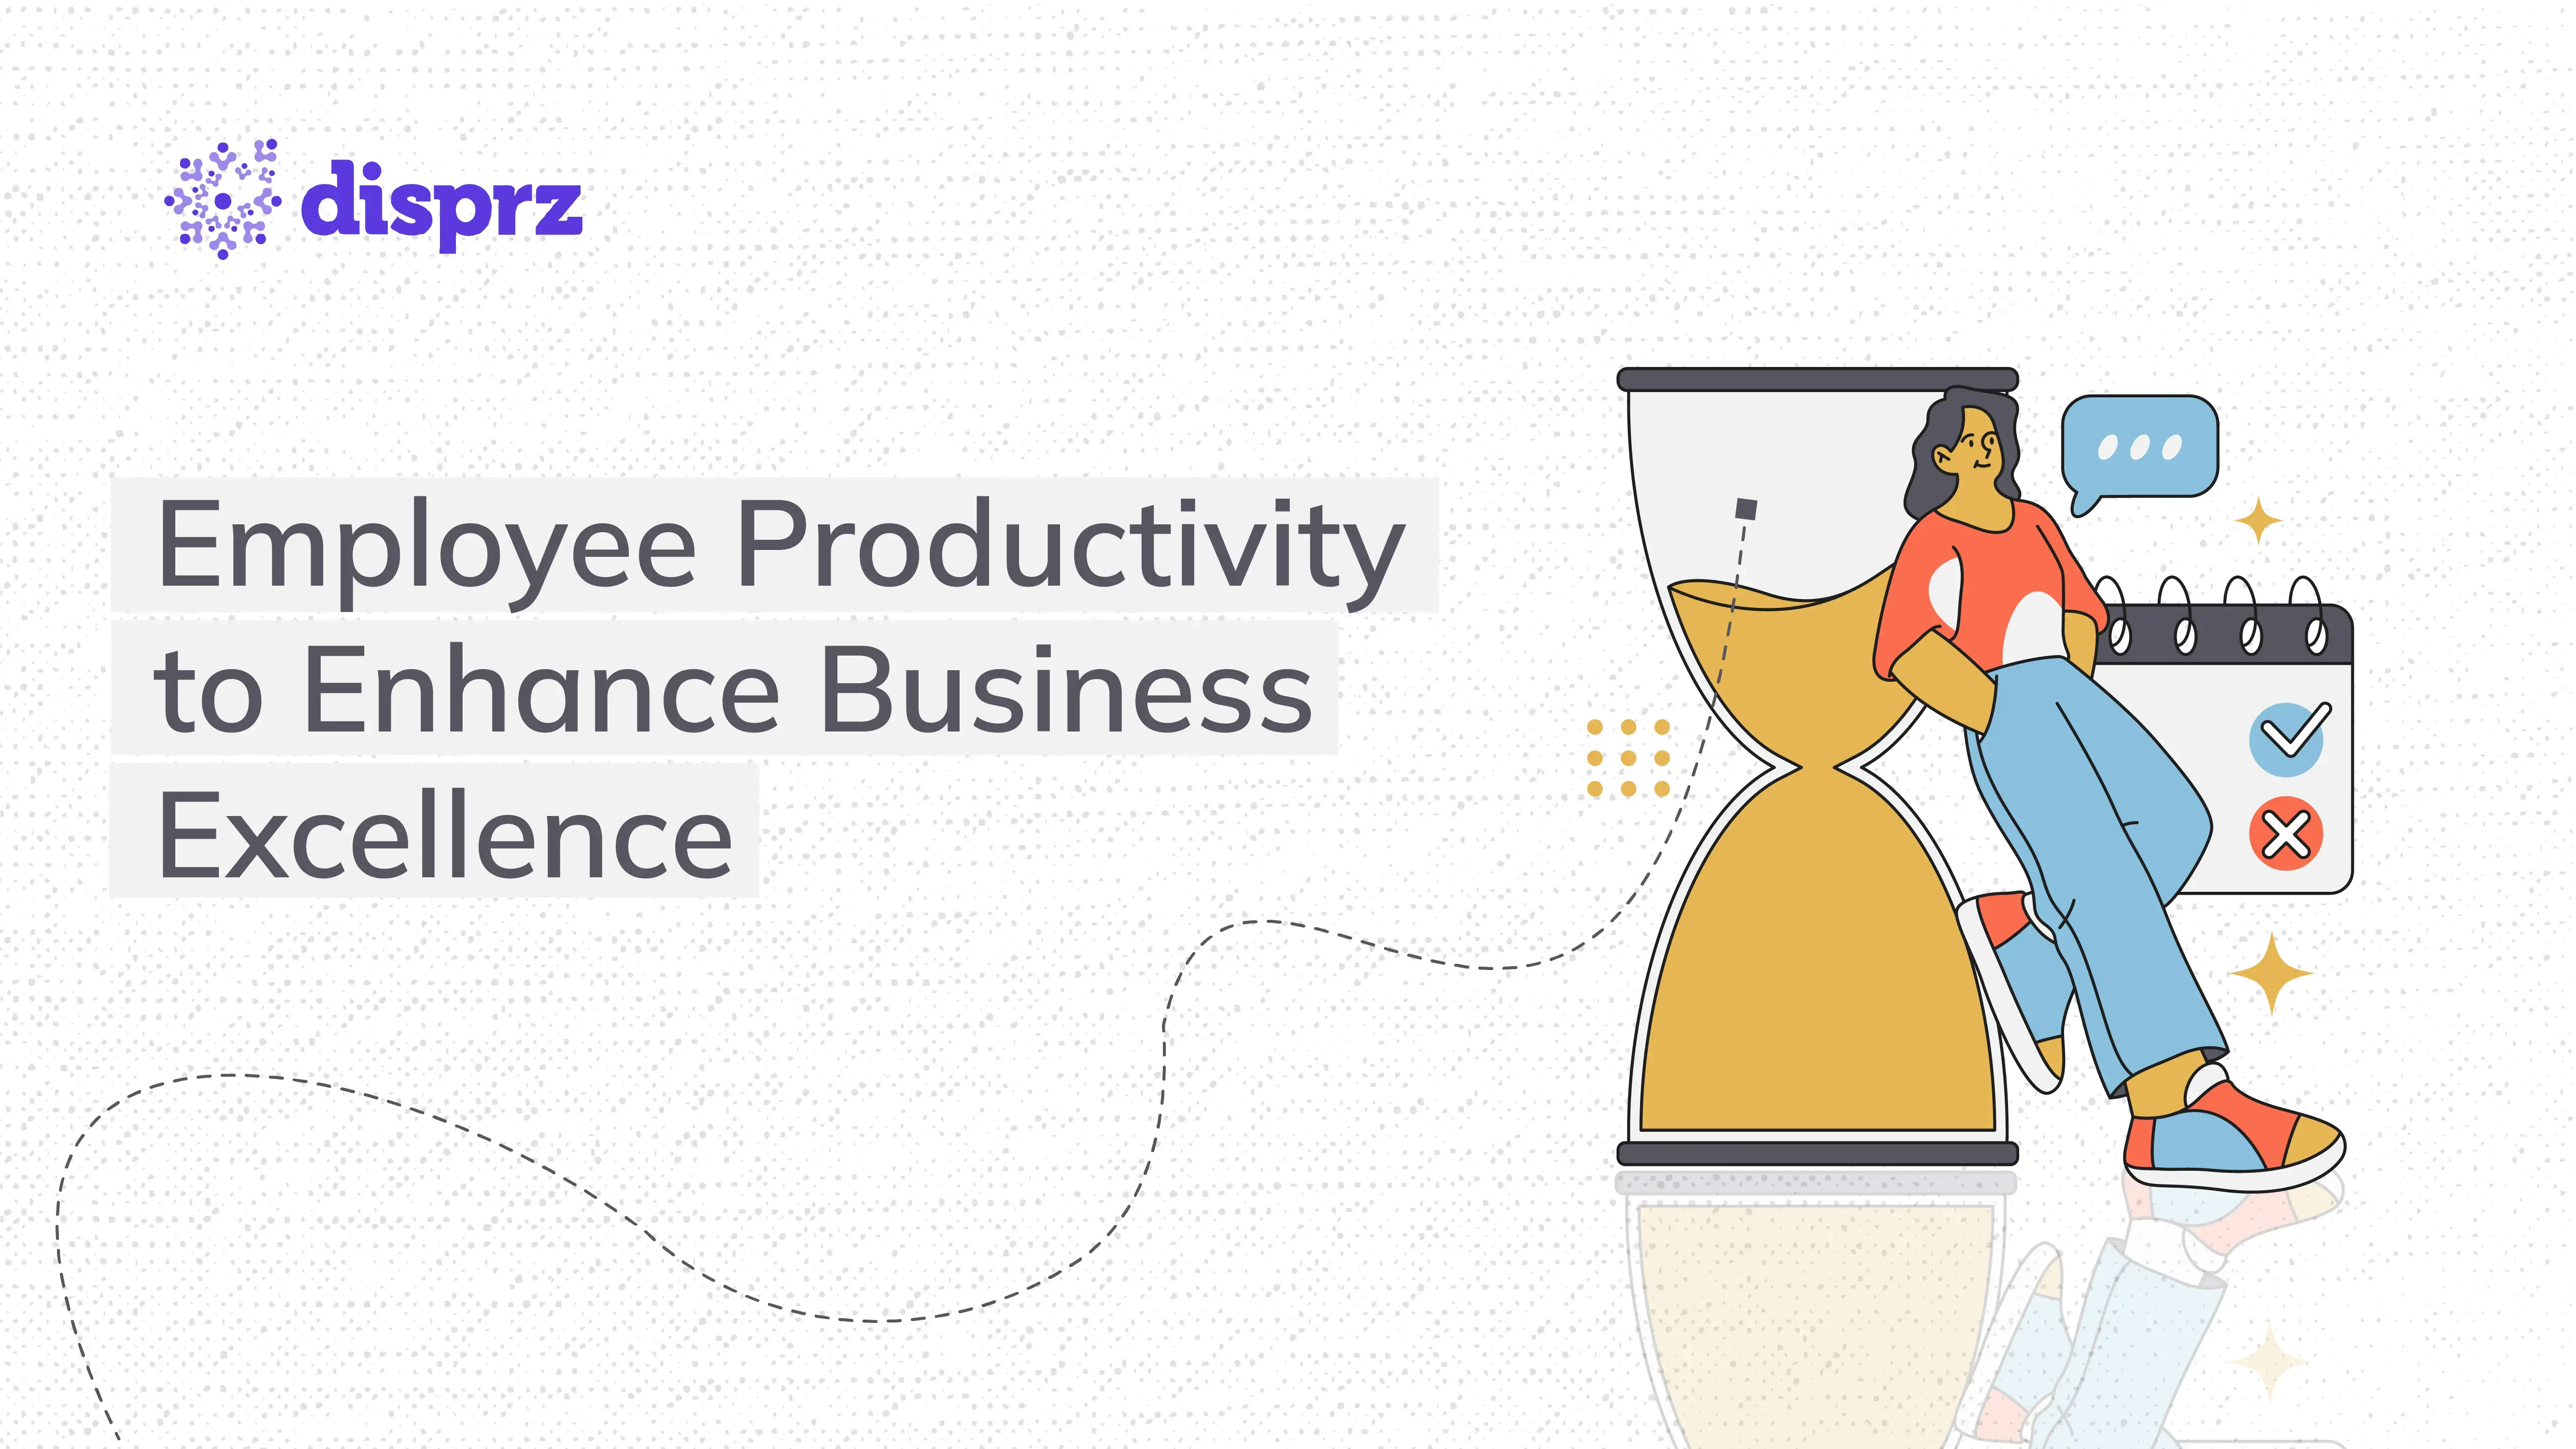 Employee Productivity to Enhance Business Excellence